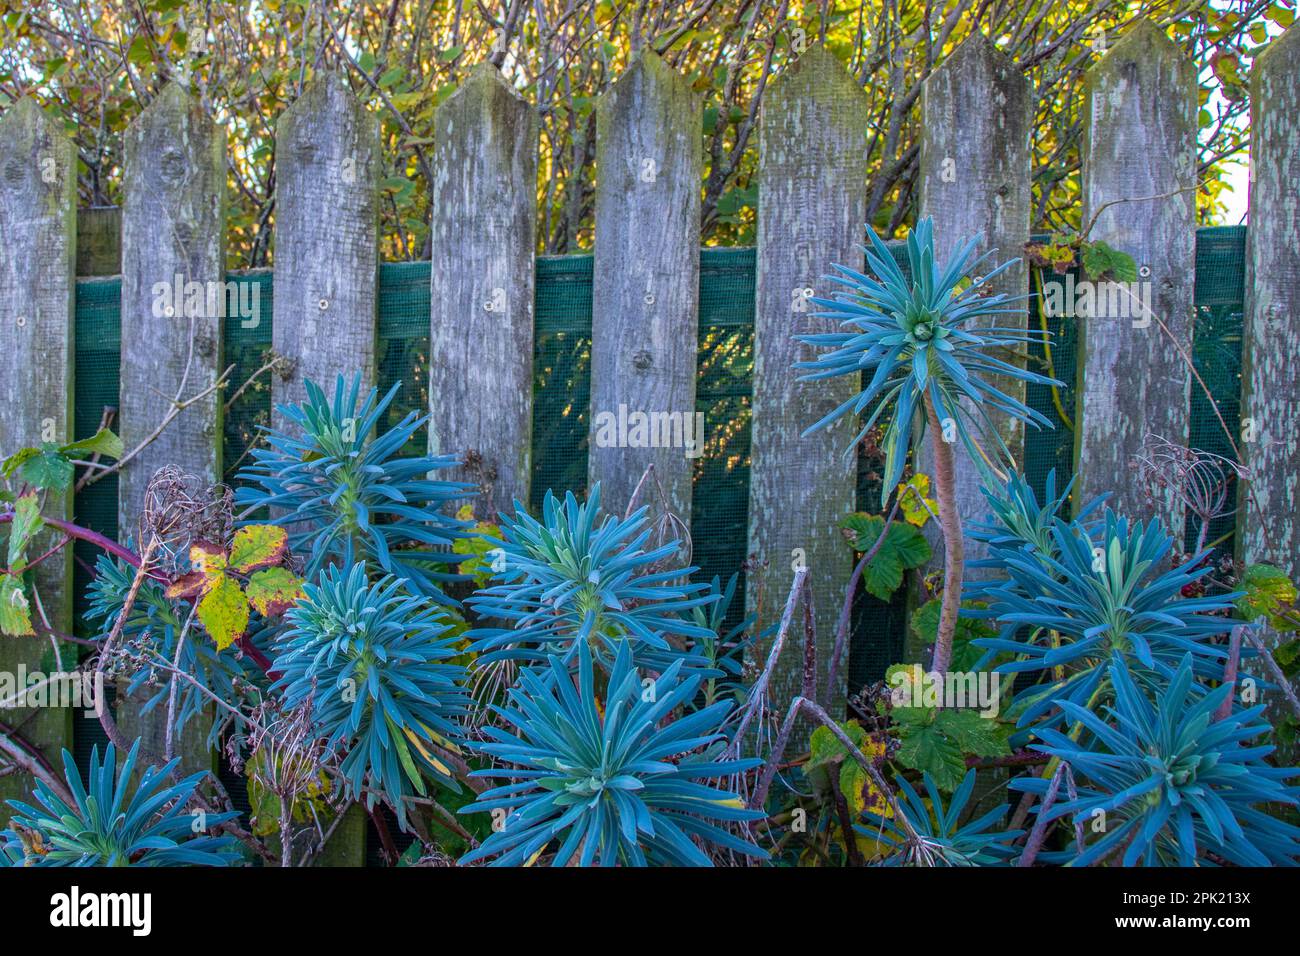 Spiky sea green plants against a rustic wooden mossy fence with bushes in the background showing lush, overgrown foliage intertwined with the man-made Stock Photo